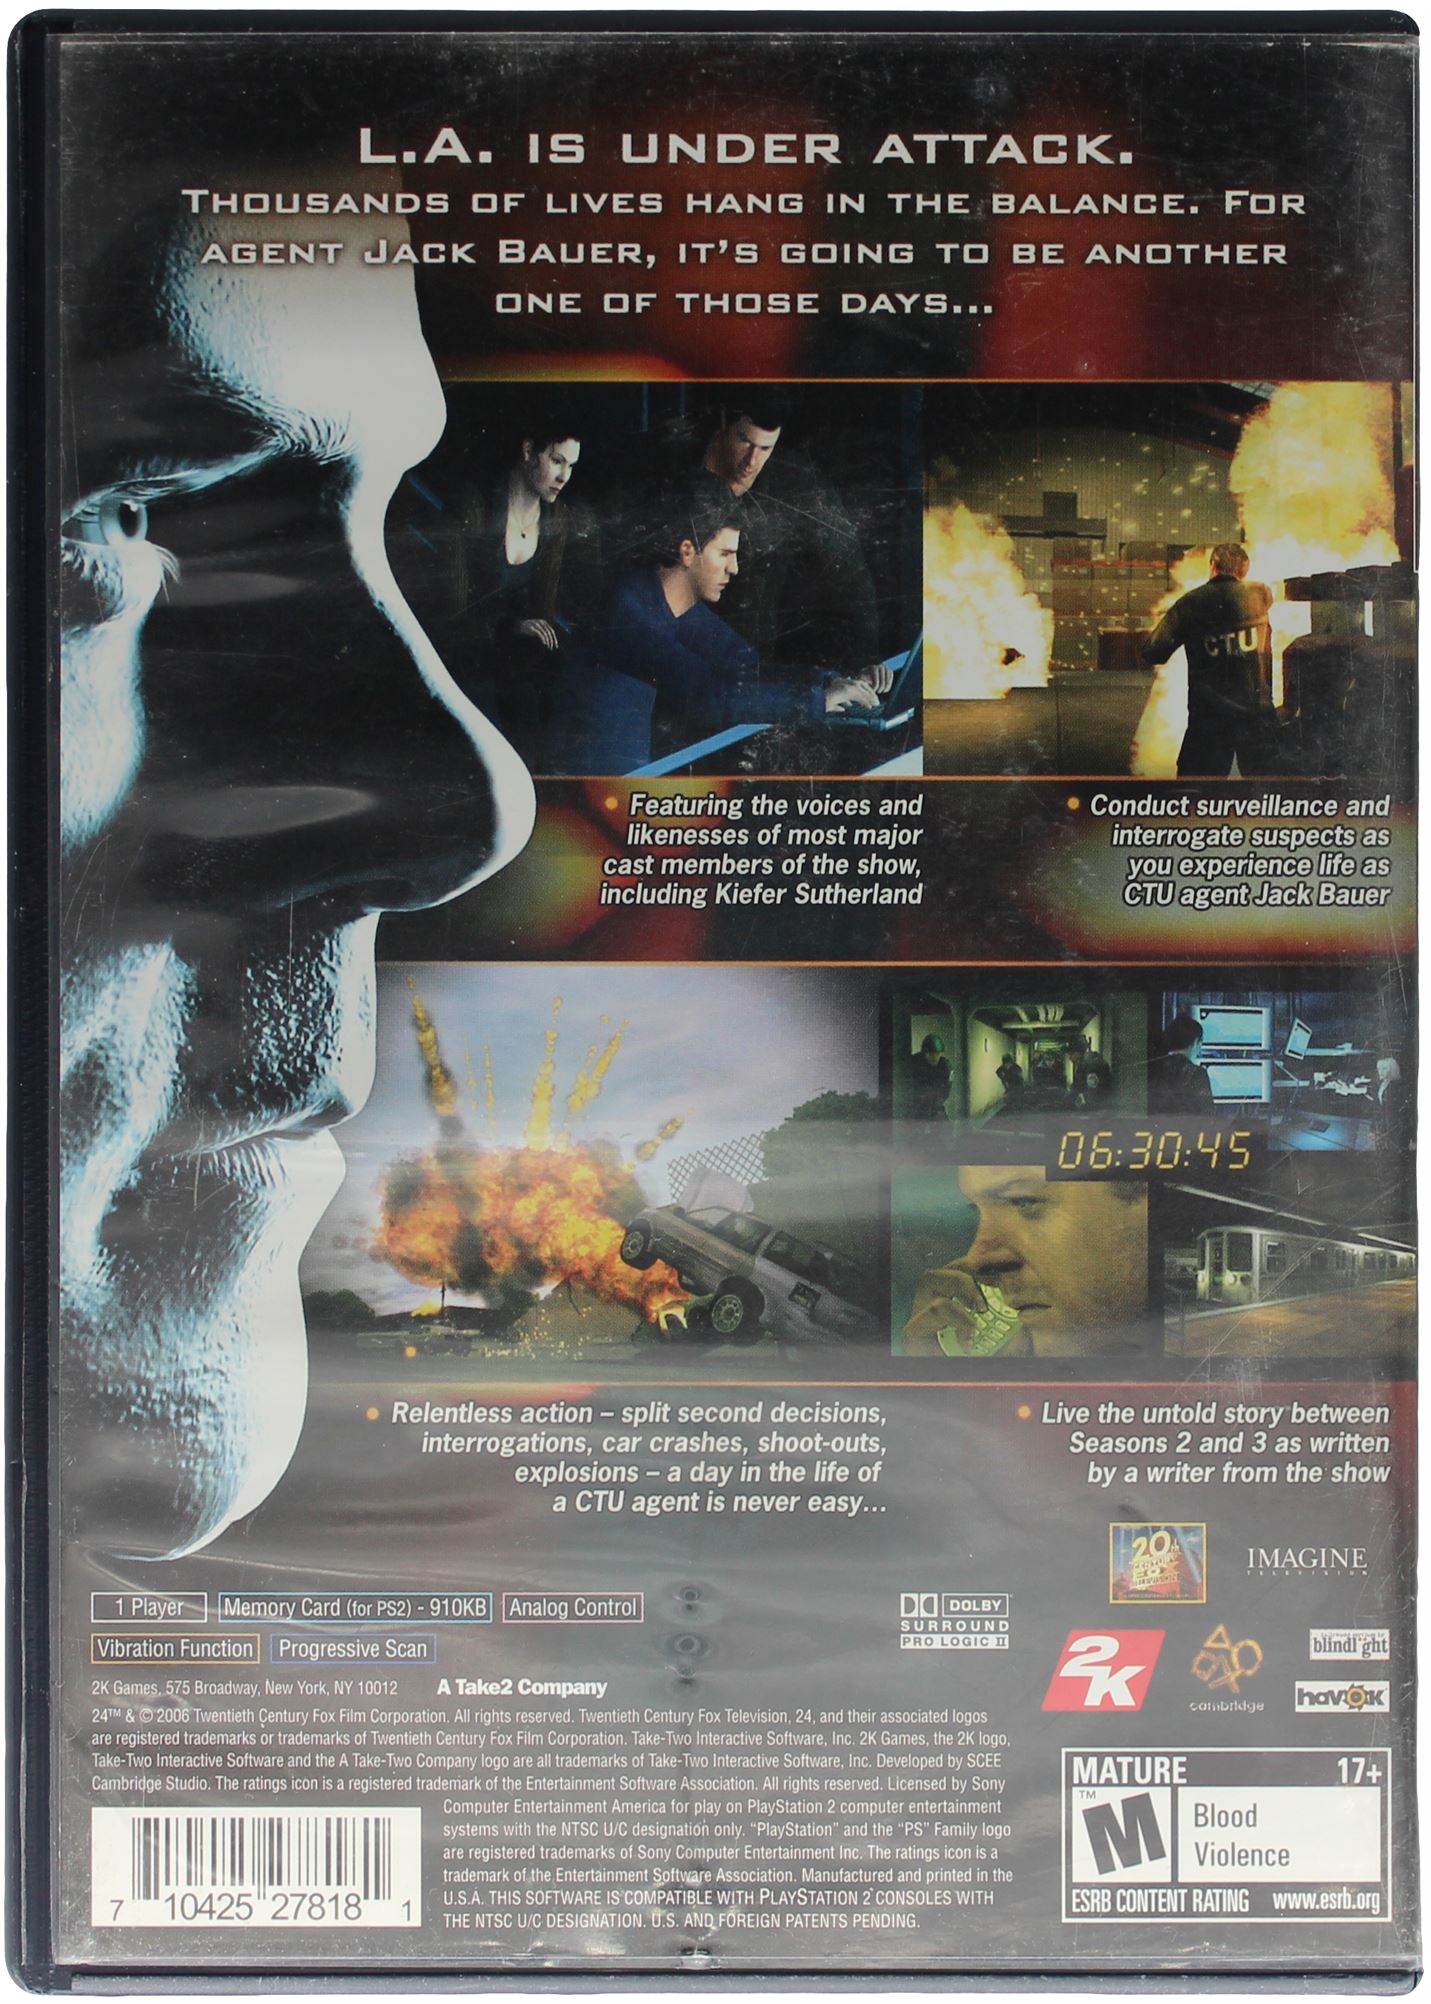 24: The Game (PS2)